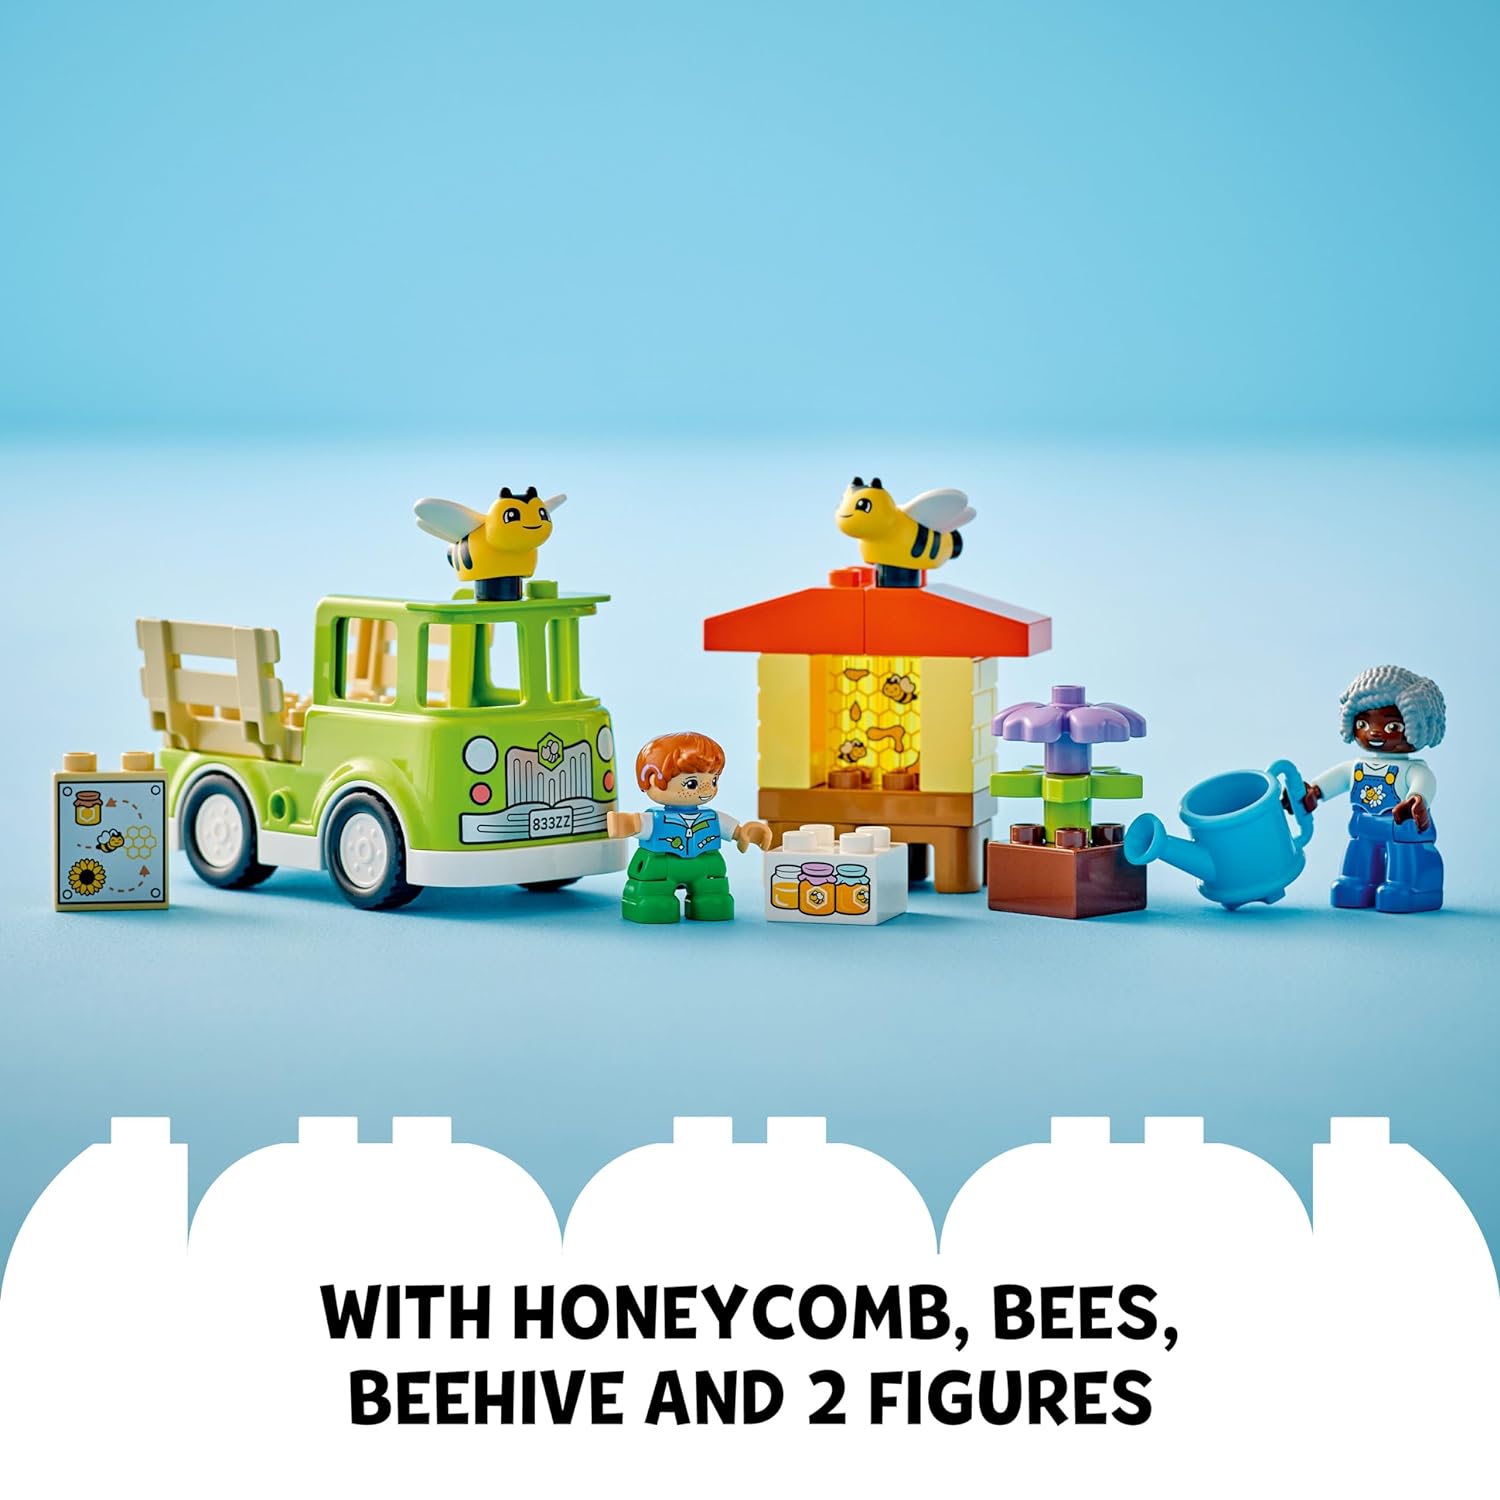 LEGO DUPLO Town Caring for Bees & Beehives Building Kit for Ages 2+